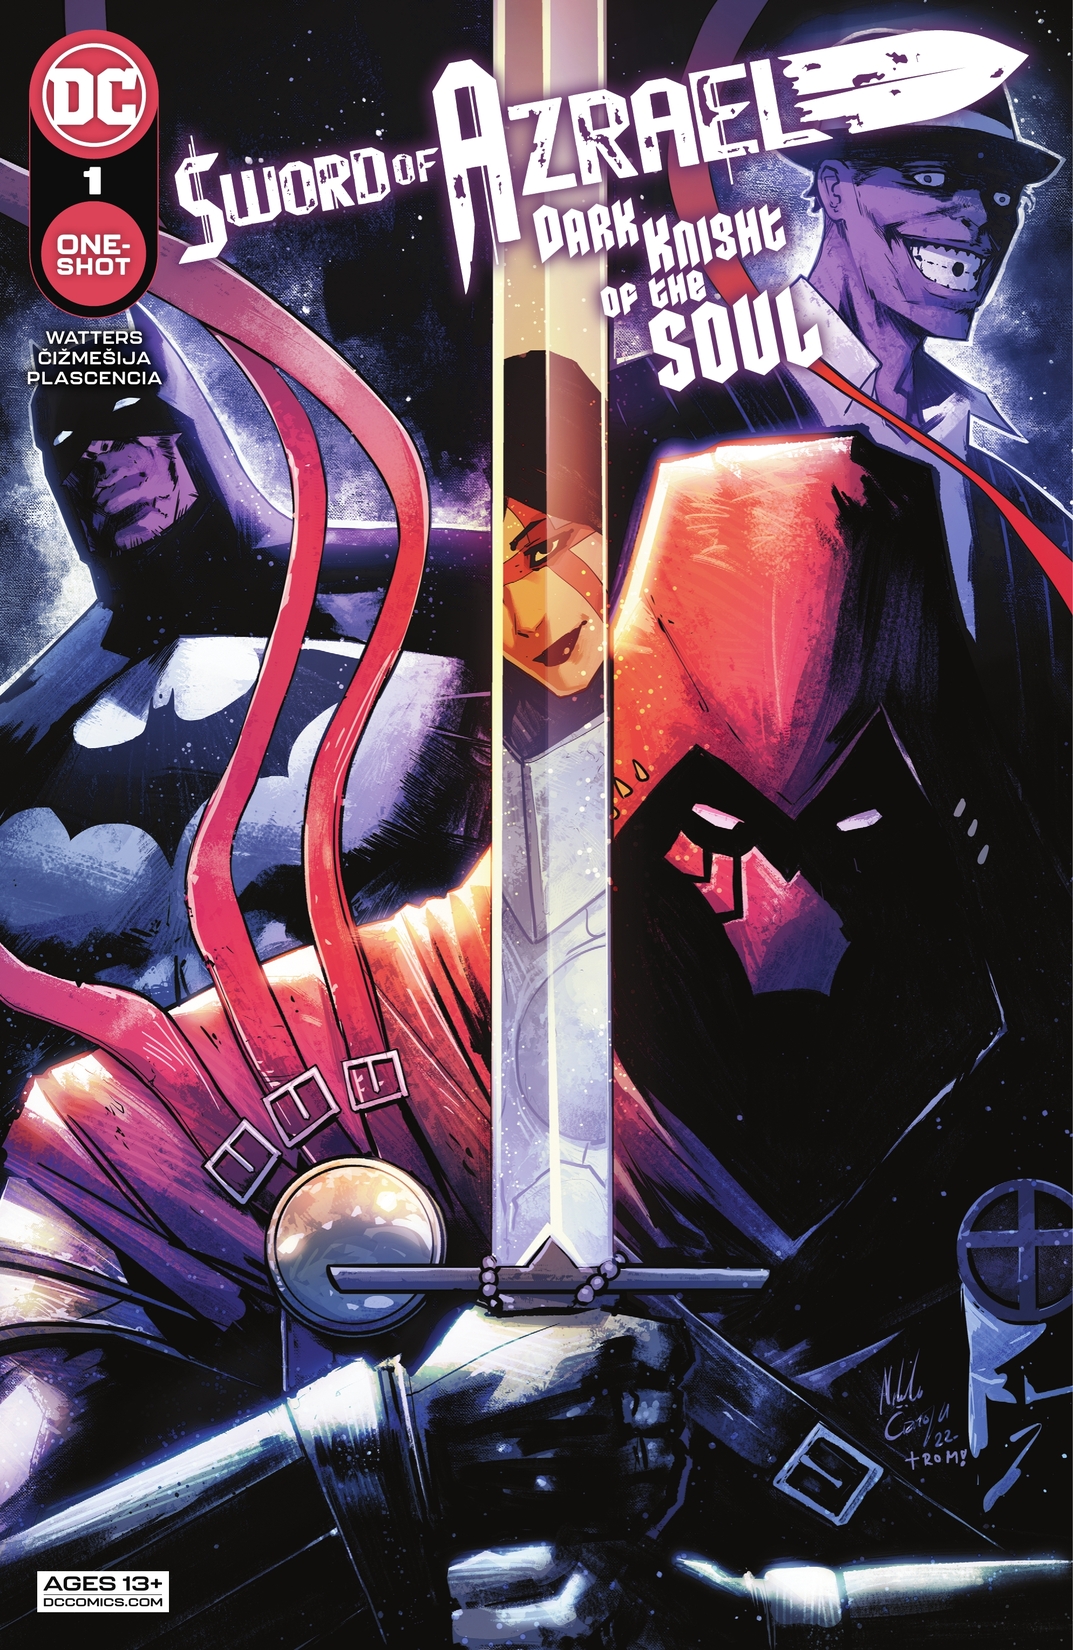 Sword of Azrael: Dark Knight of the Soul #1 preview images